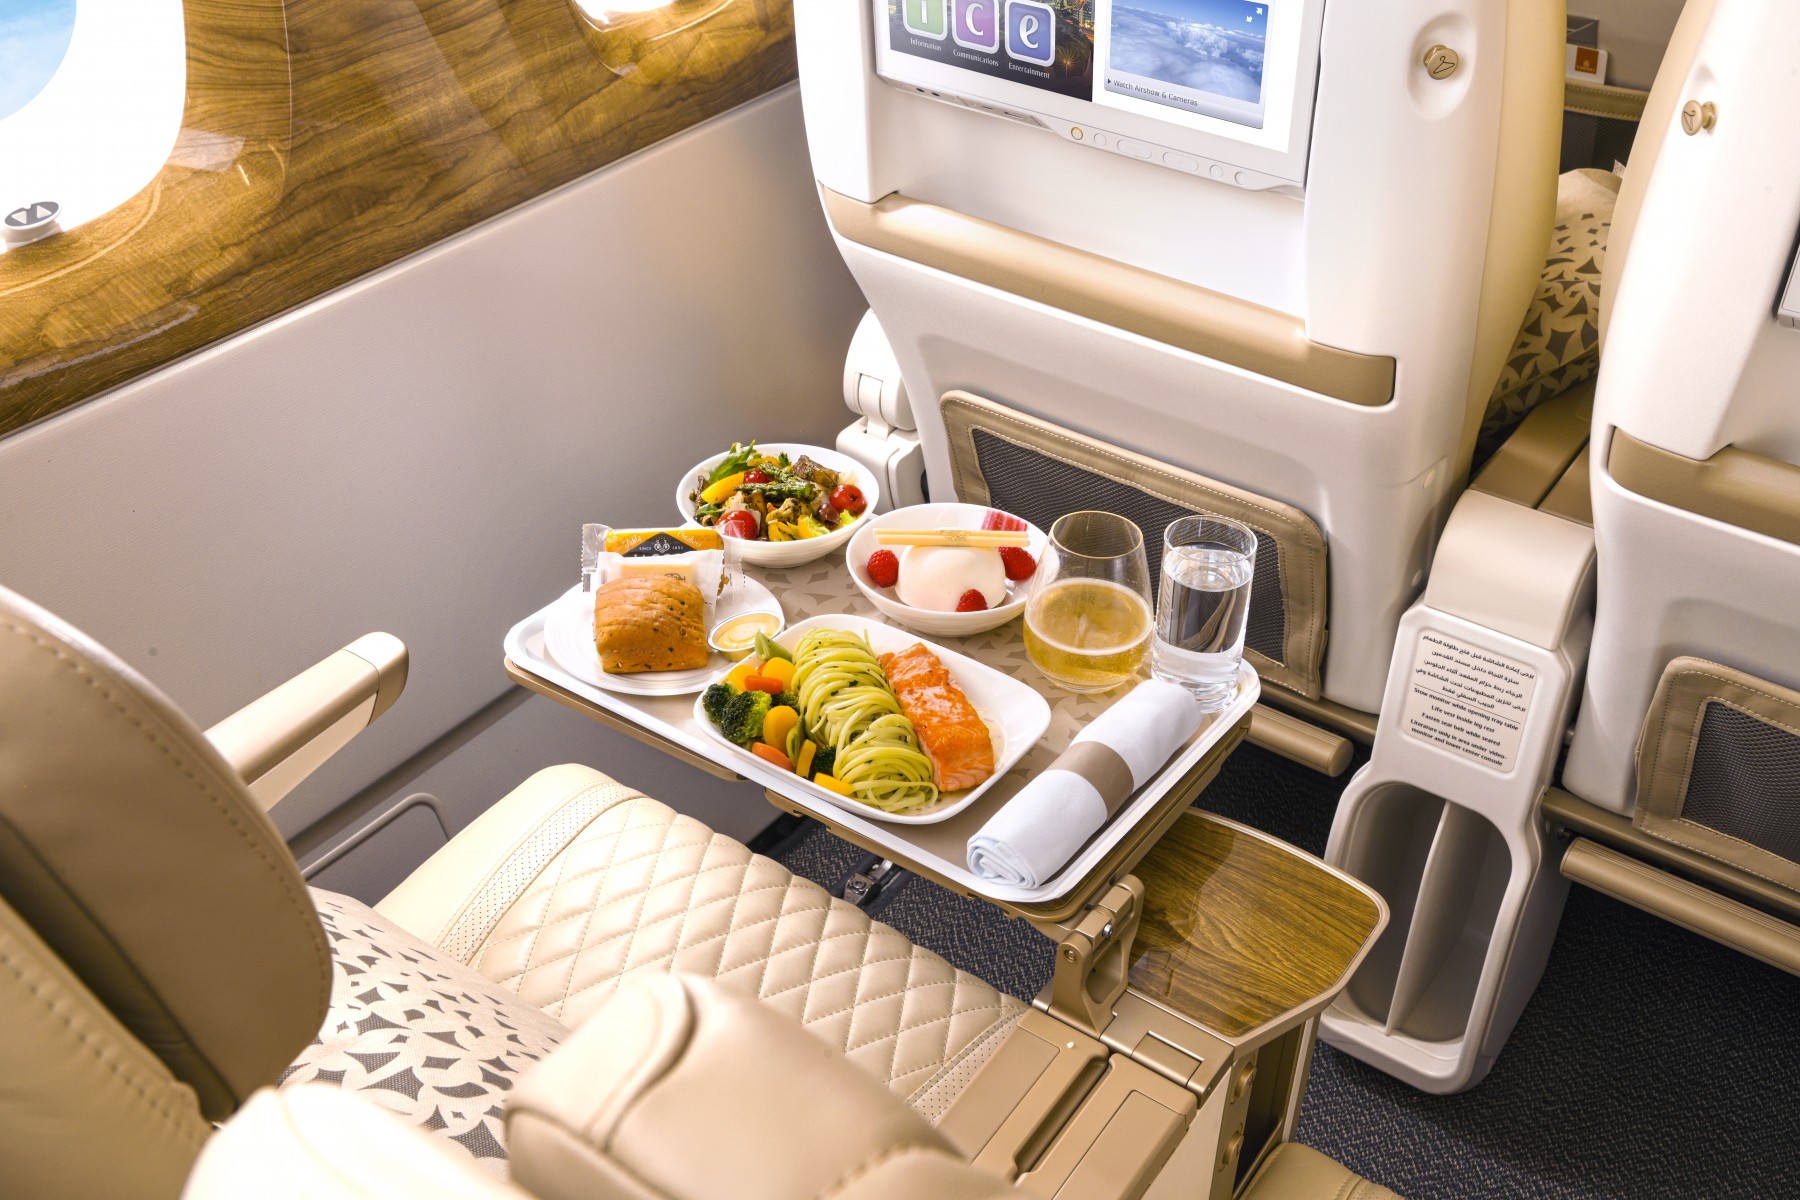 Emirates Offers an Exclusive Vintage Sparkling Wine, Chandon, in Premium Economy